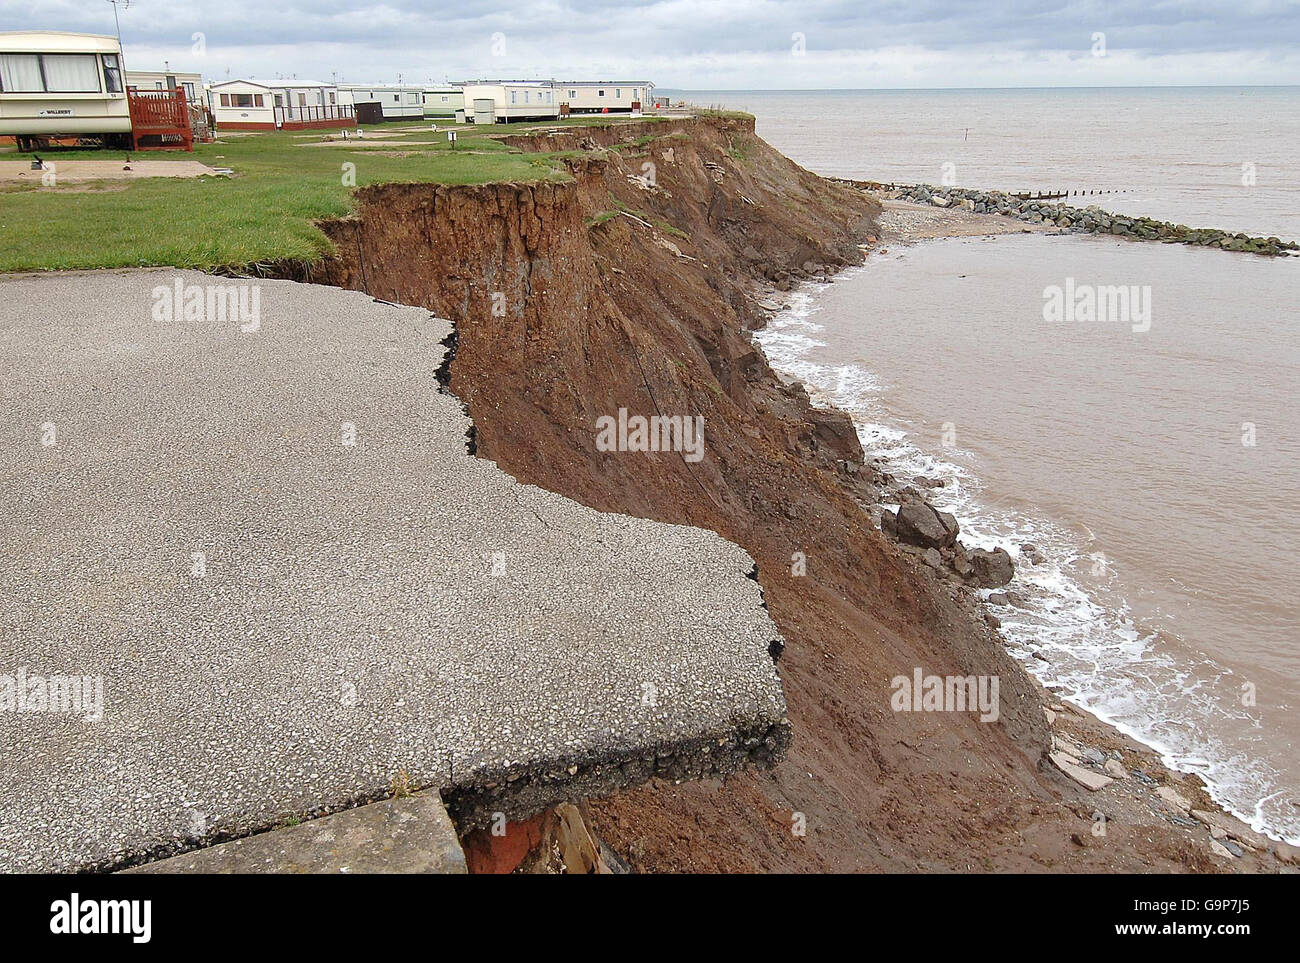 Caravans between Hornsea and Withernsea in Yorkshire, which now lie on the brink of the East Coast after 15 metres of land was swept away this winter following the heavy rainfalls. Stock Photo